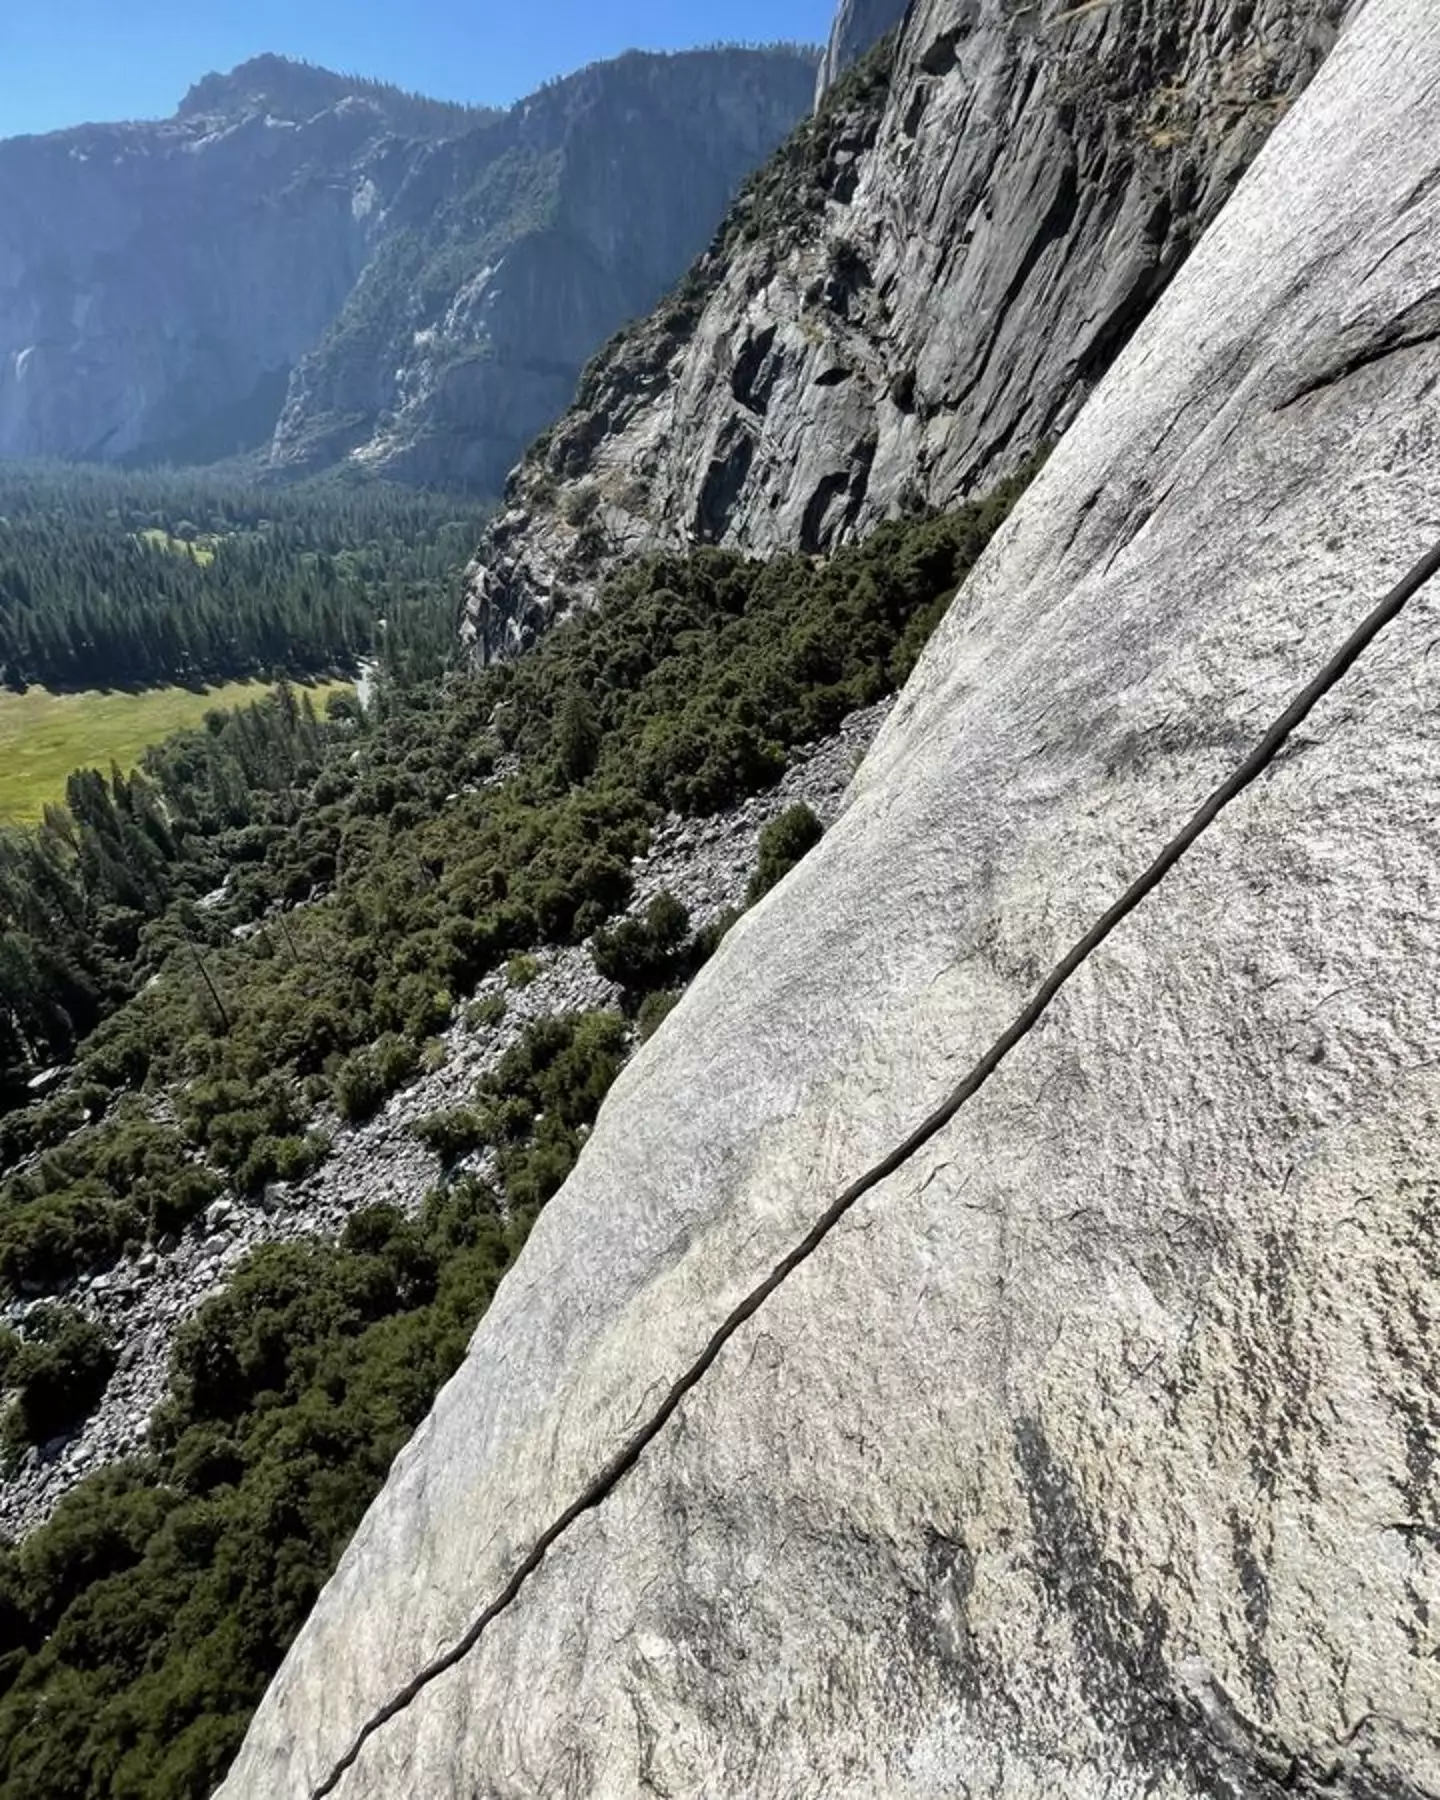 The 'Super Natural' crack was noticed by climbers.